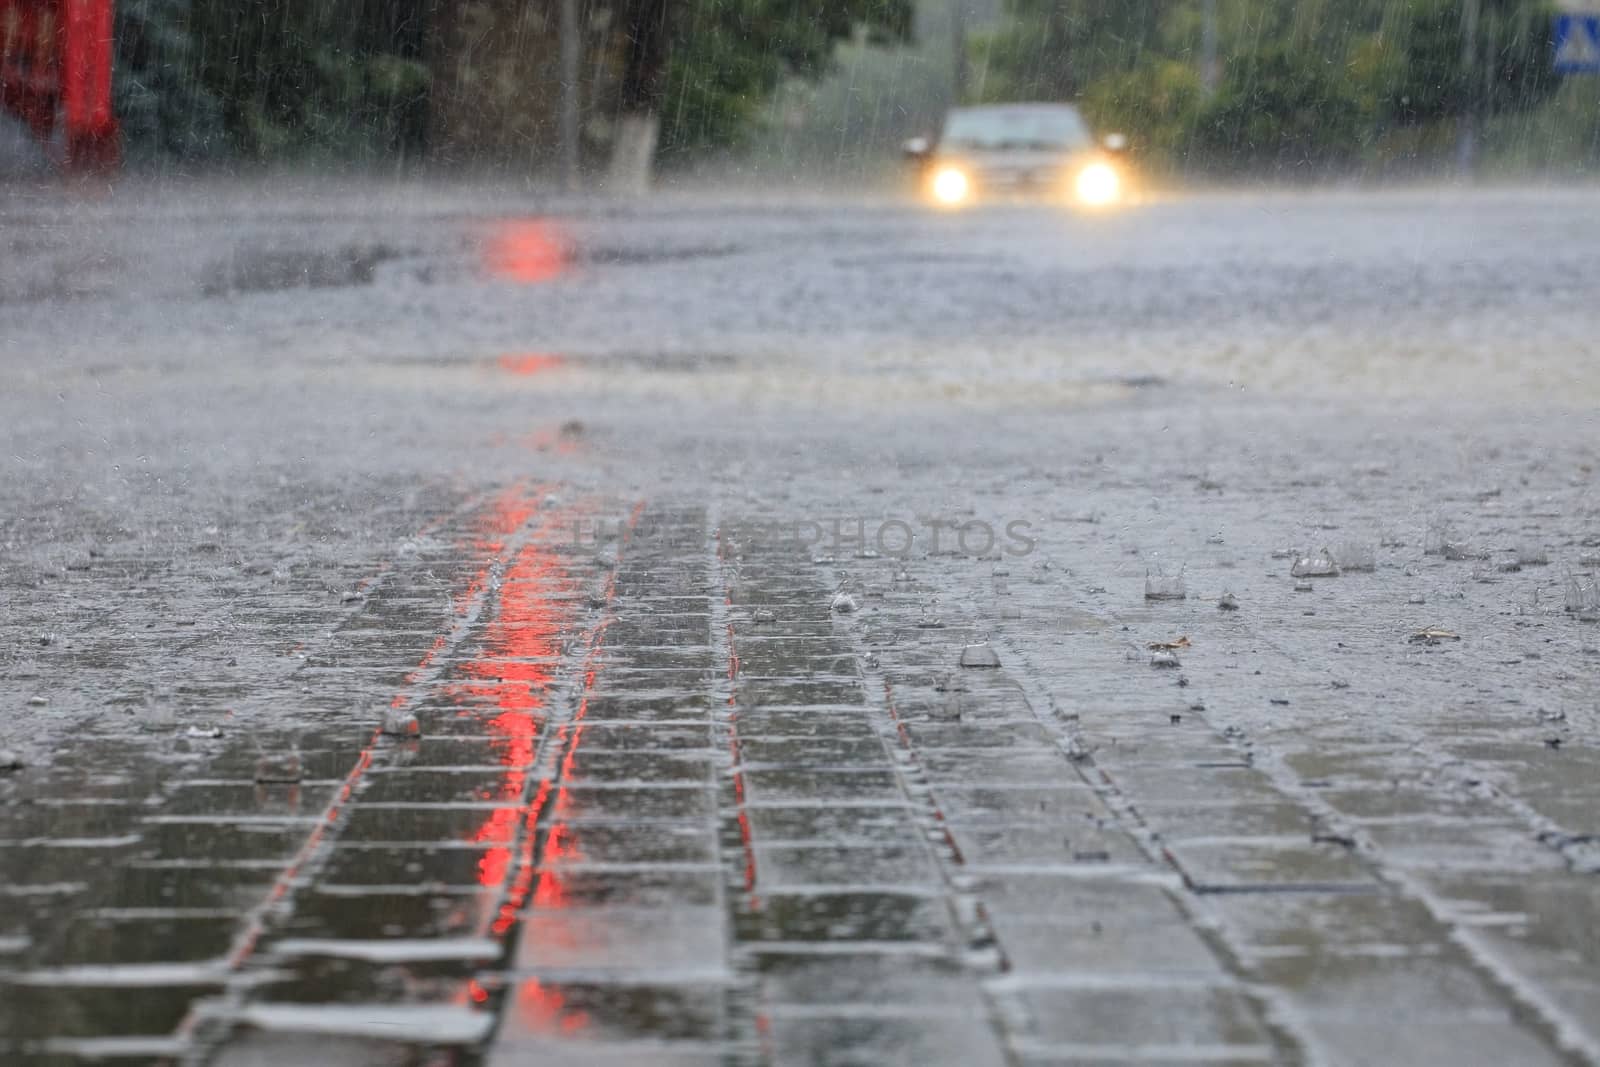 Torrential rain at an empty crossroads and red light reflected in the flow of water on a city street.